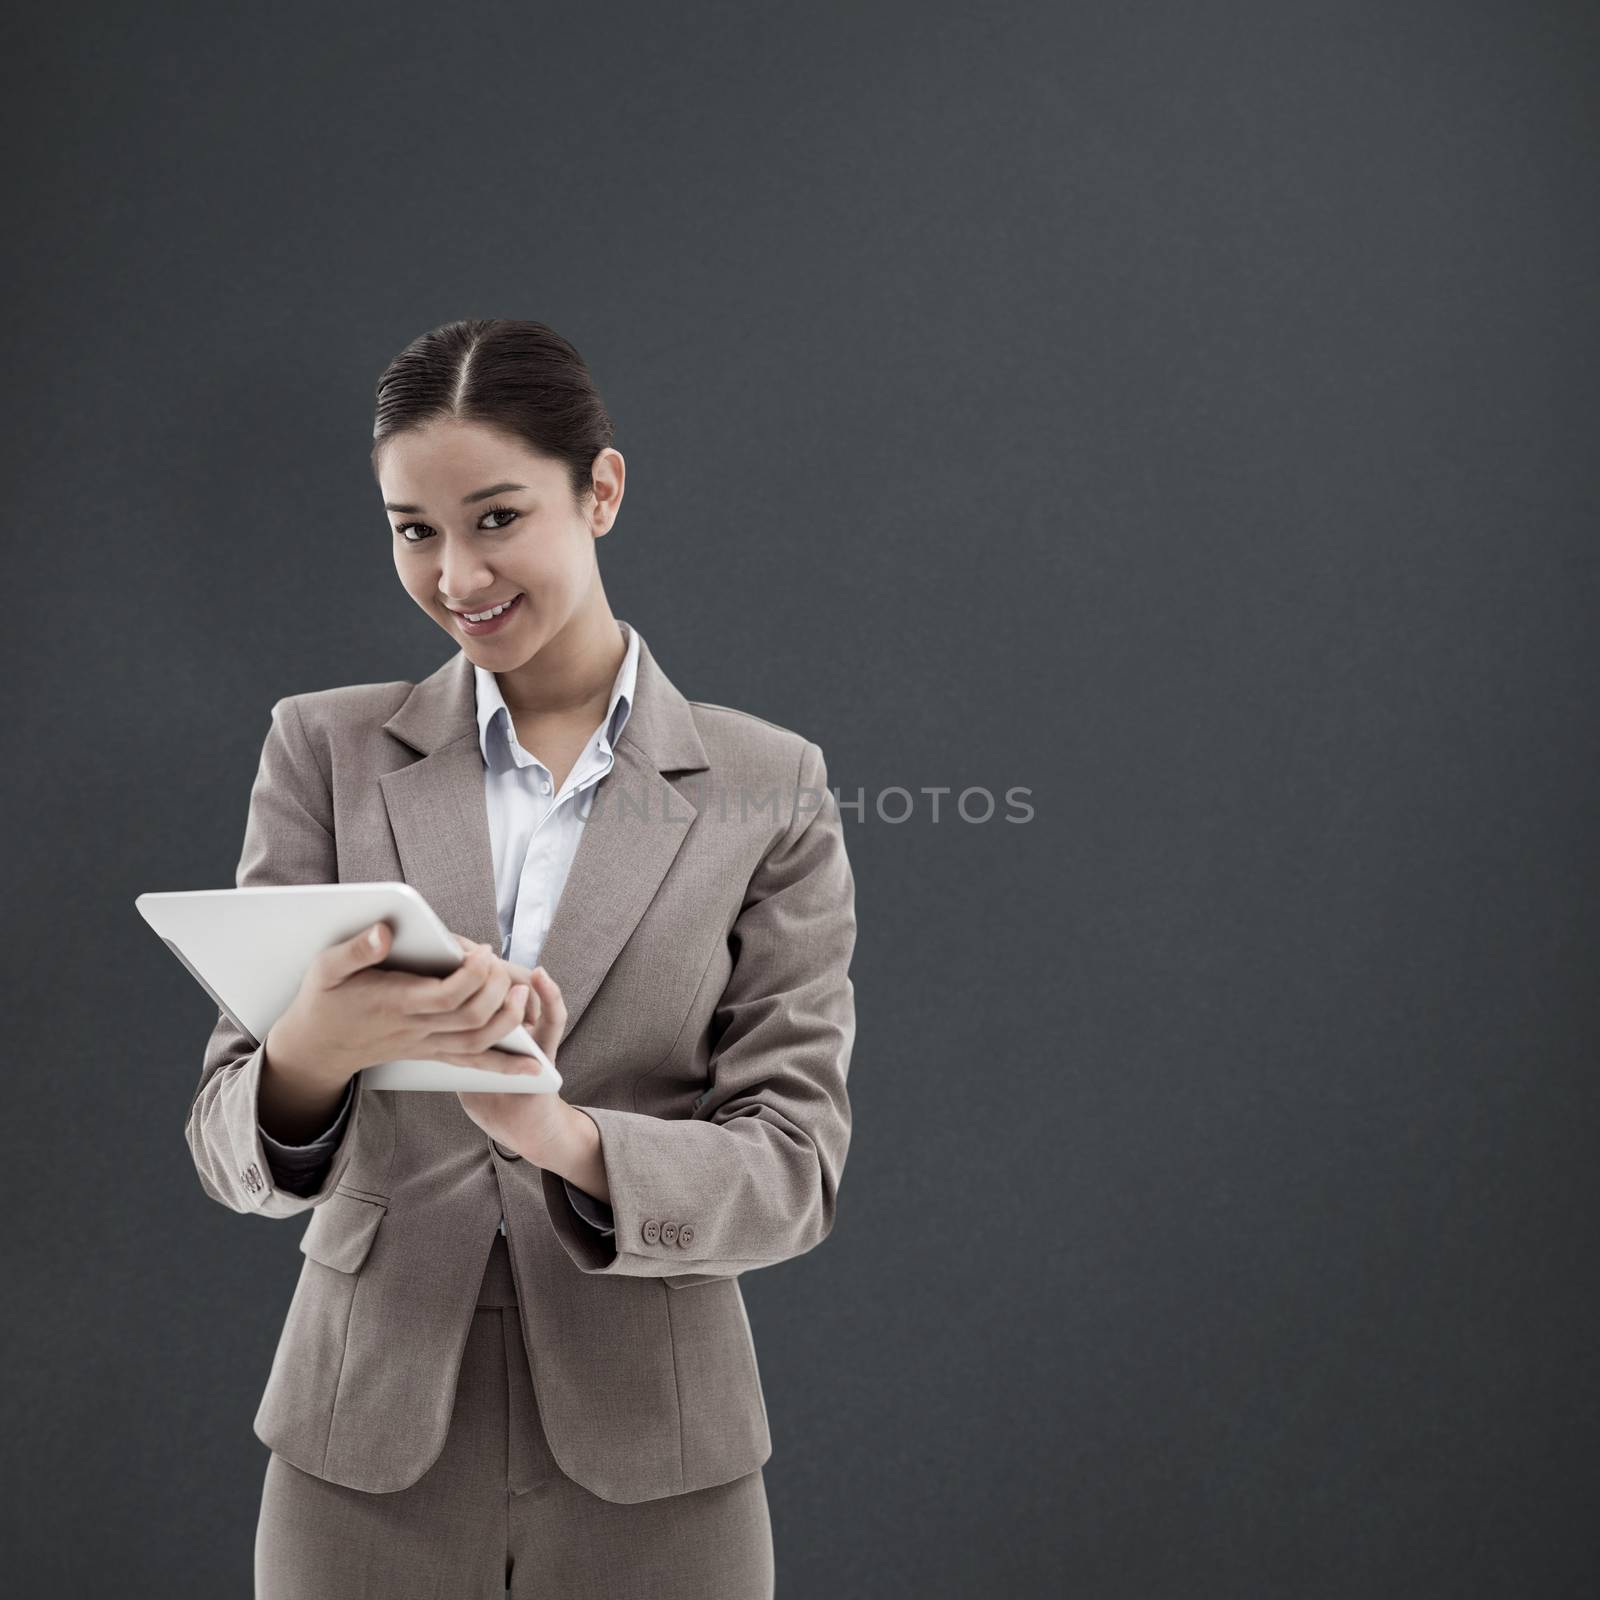 Composite image of portrait of a smiling businesswoman using a tablet computer by Wavebreakmedia